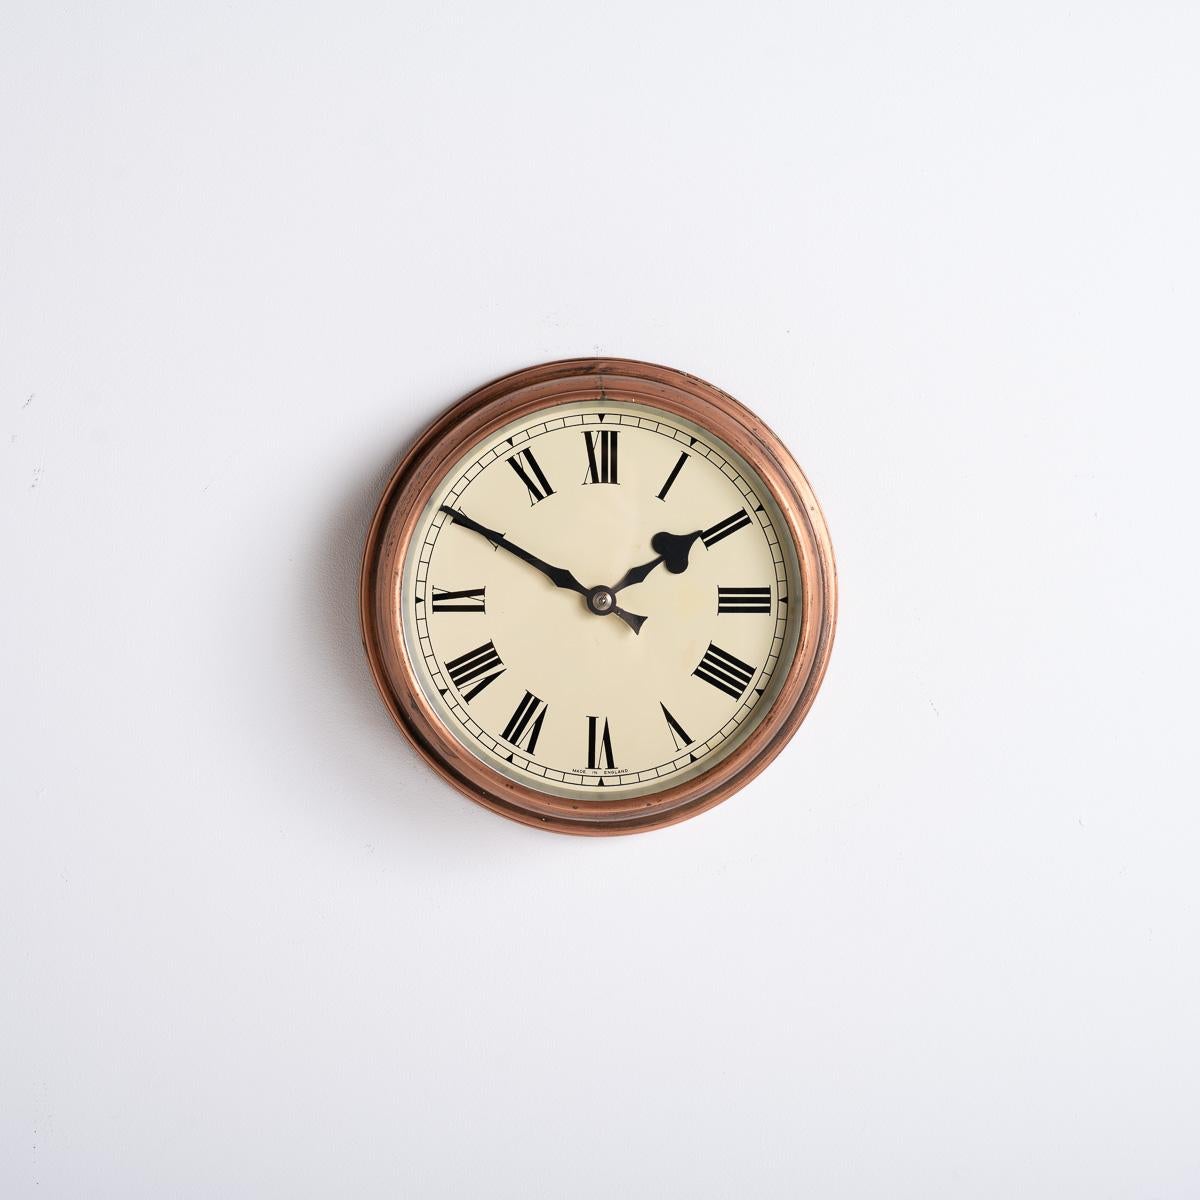 Reclaimed Industrial Aged Spun Copper Case Wall Clock By Synchronome 4